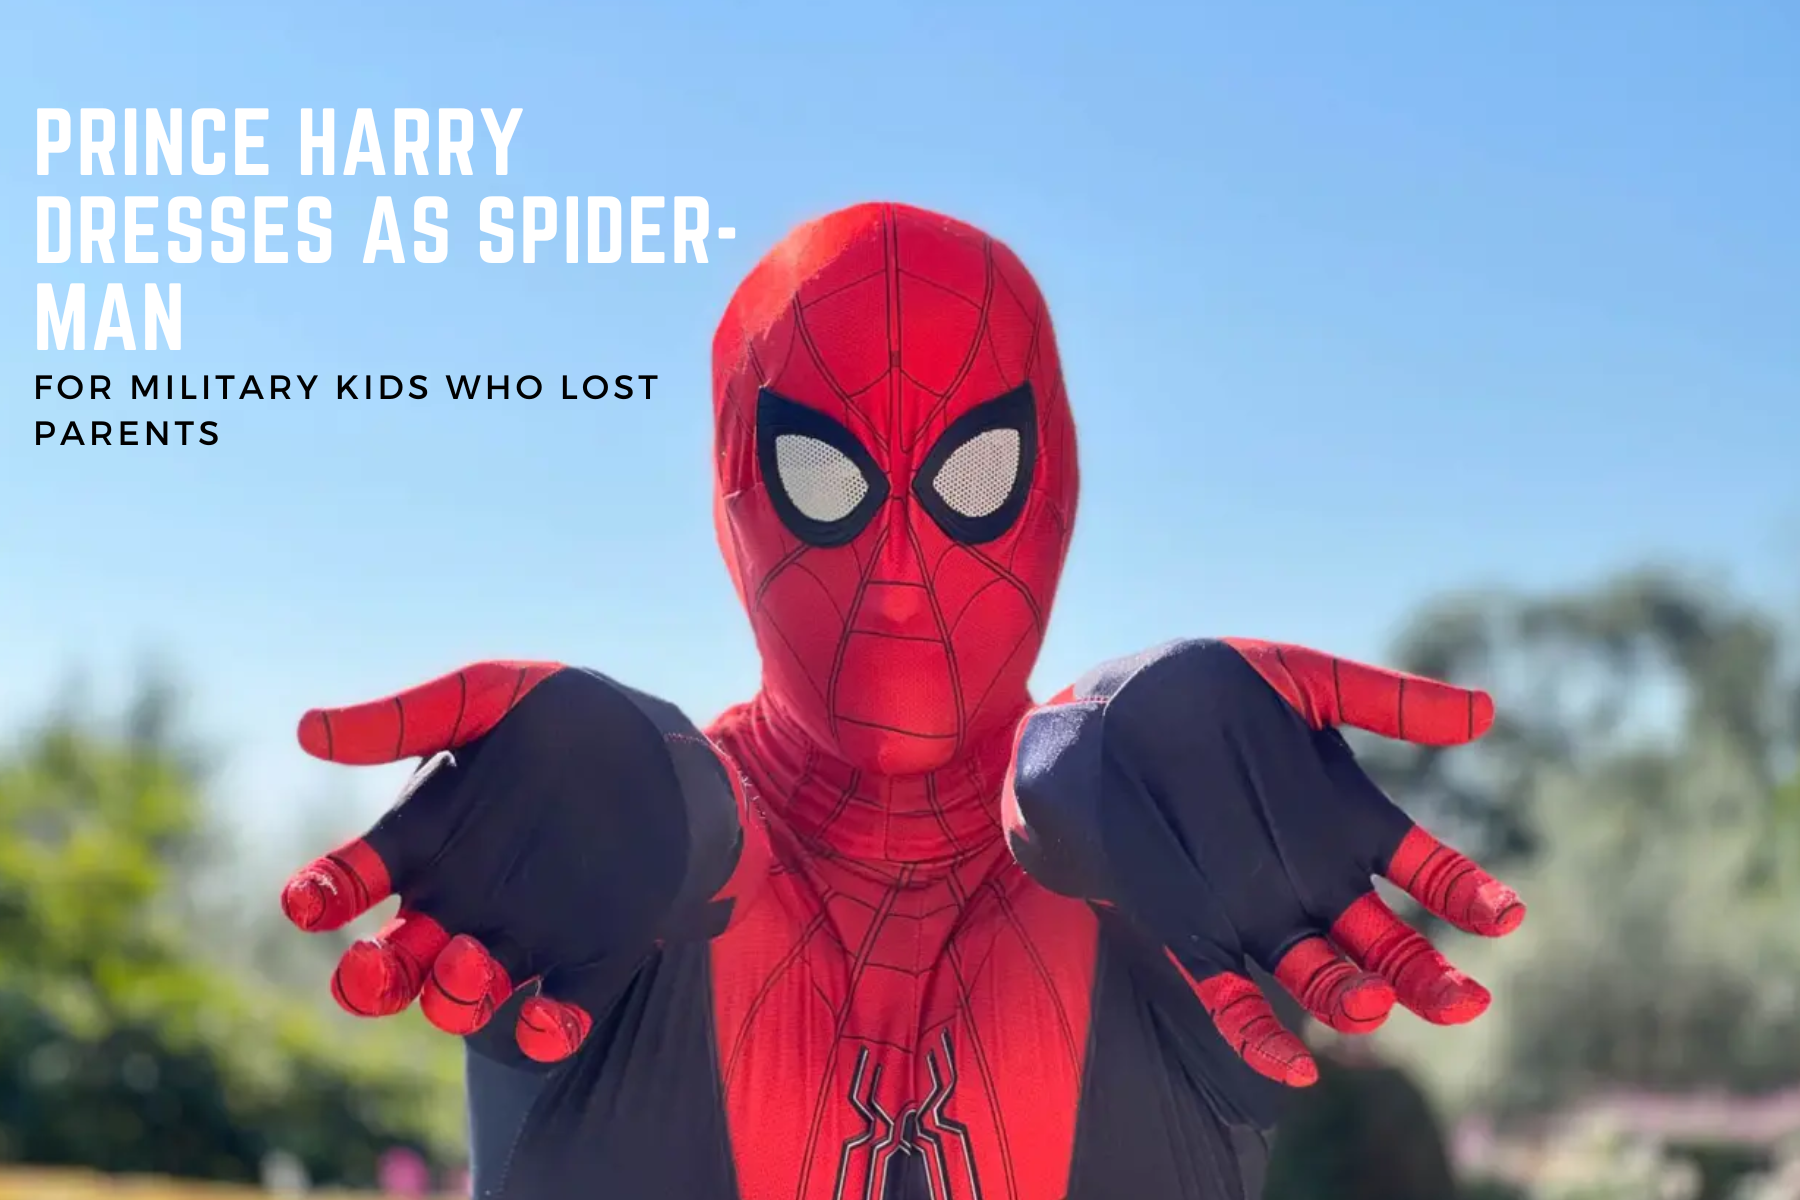 Prince Harry Dresses As Spider-Man For Military Kids Who Lost Their Parents